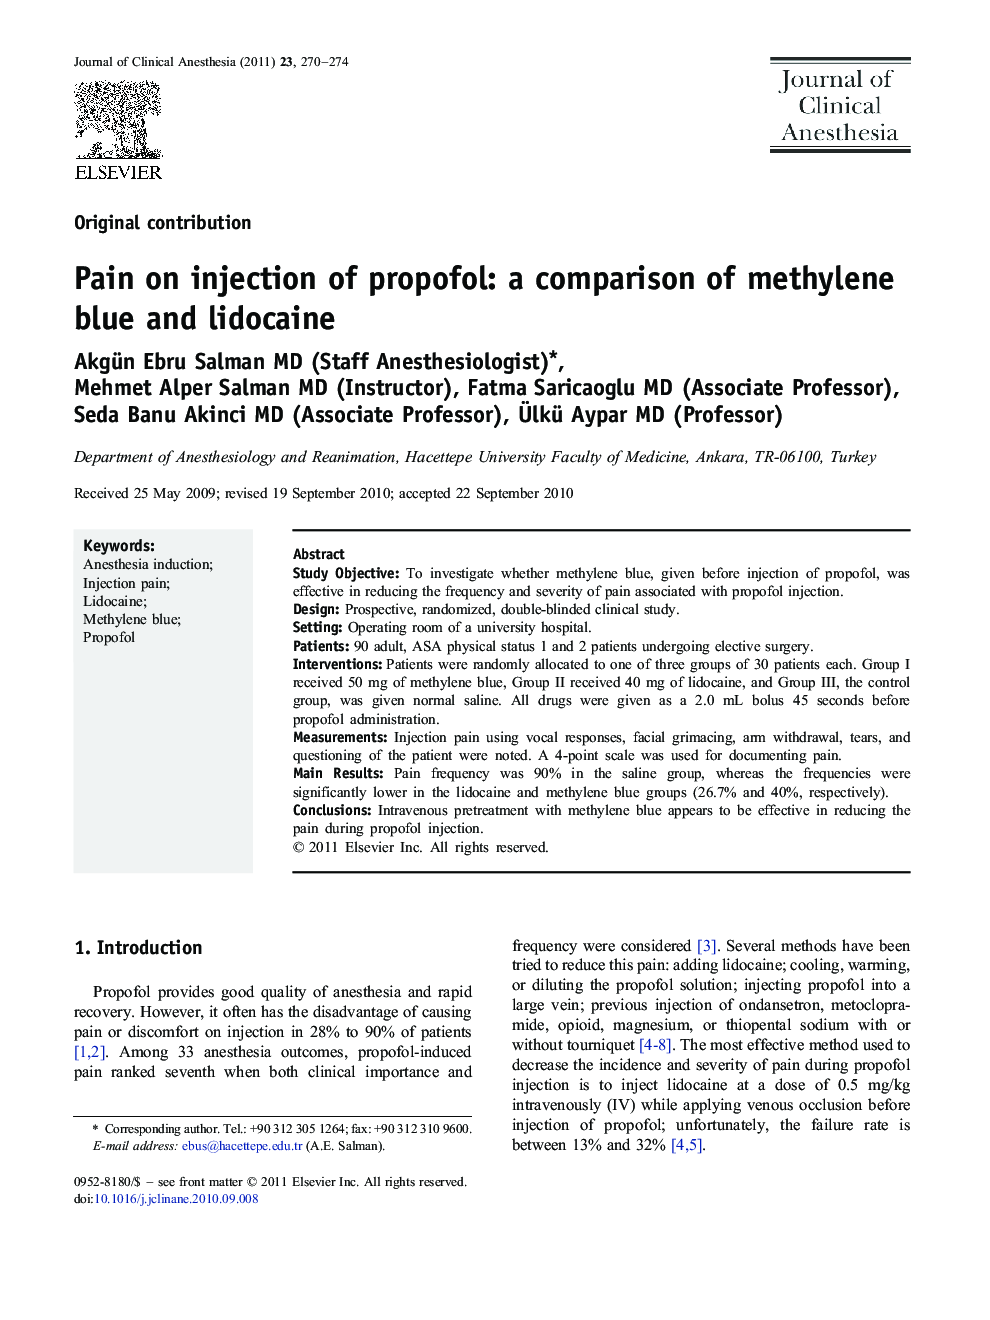 Pain on injection of propofol: a comparison of methylene blue and lidocaine